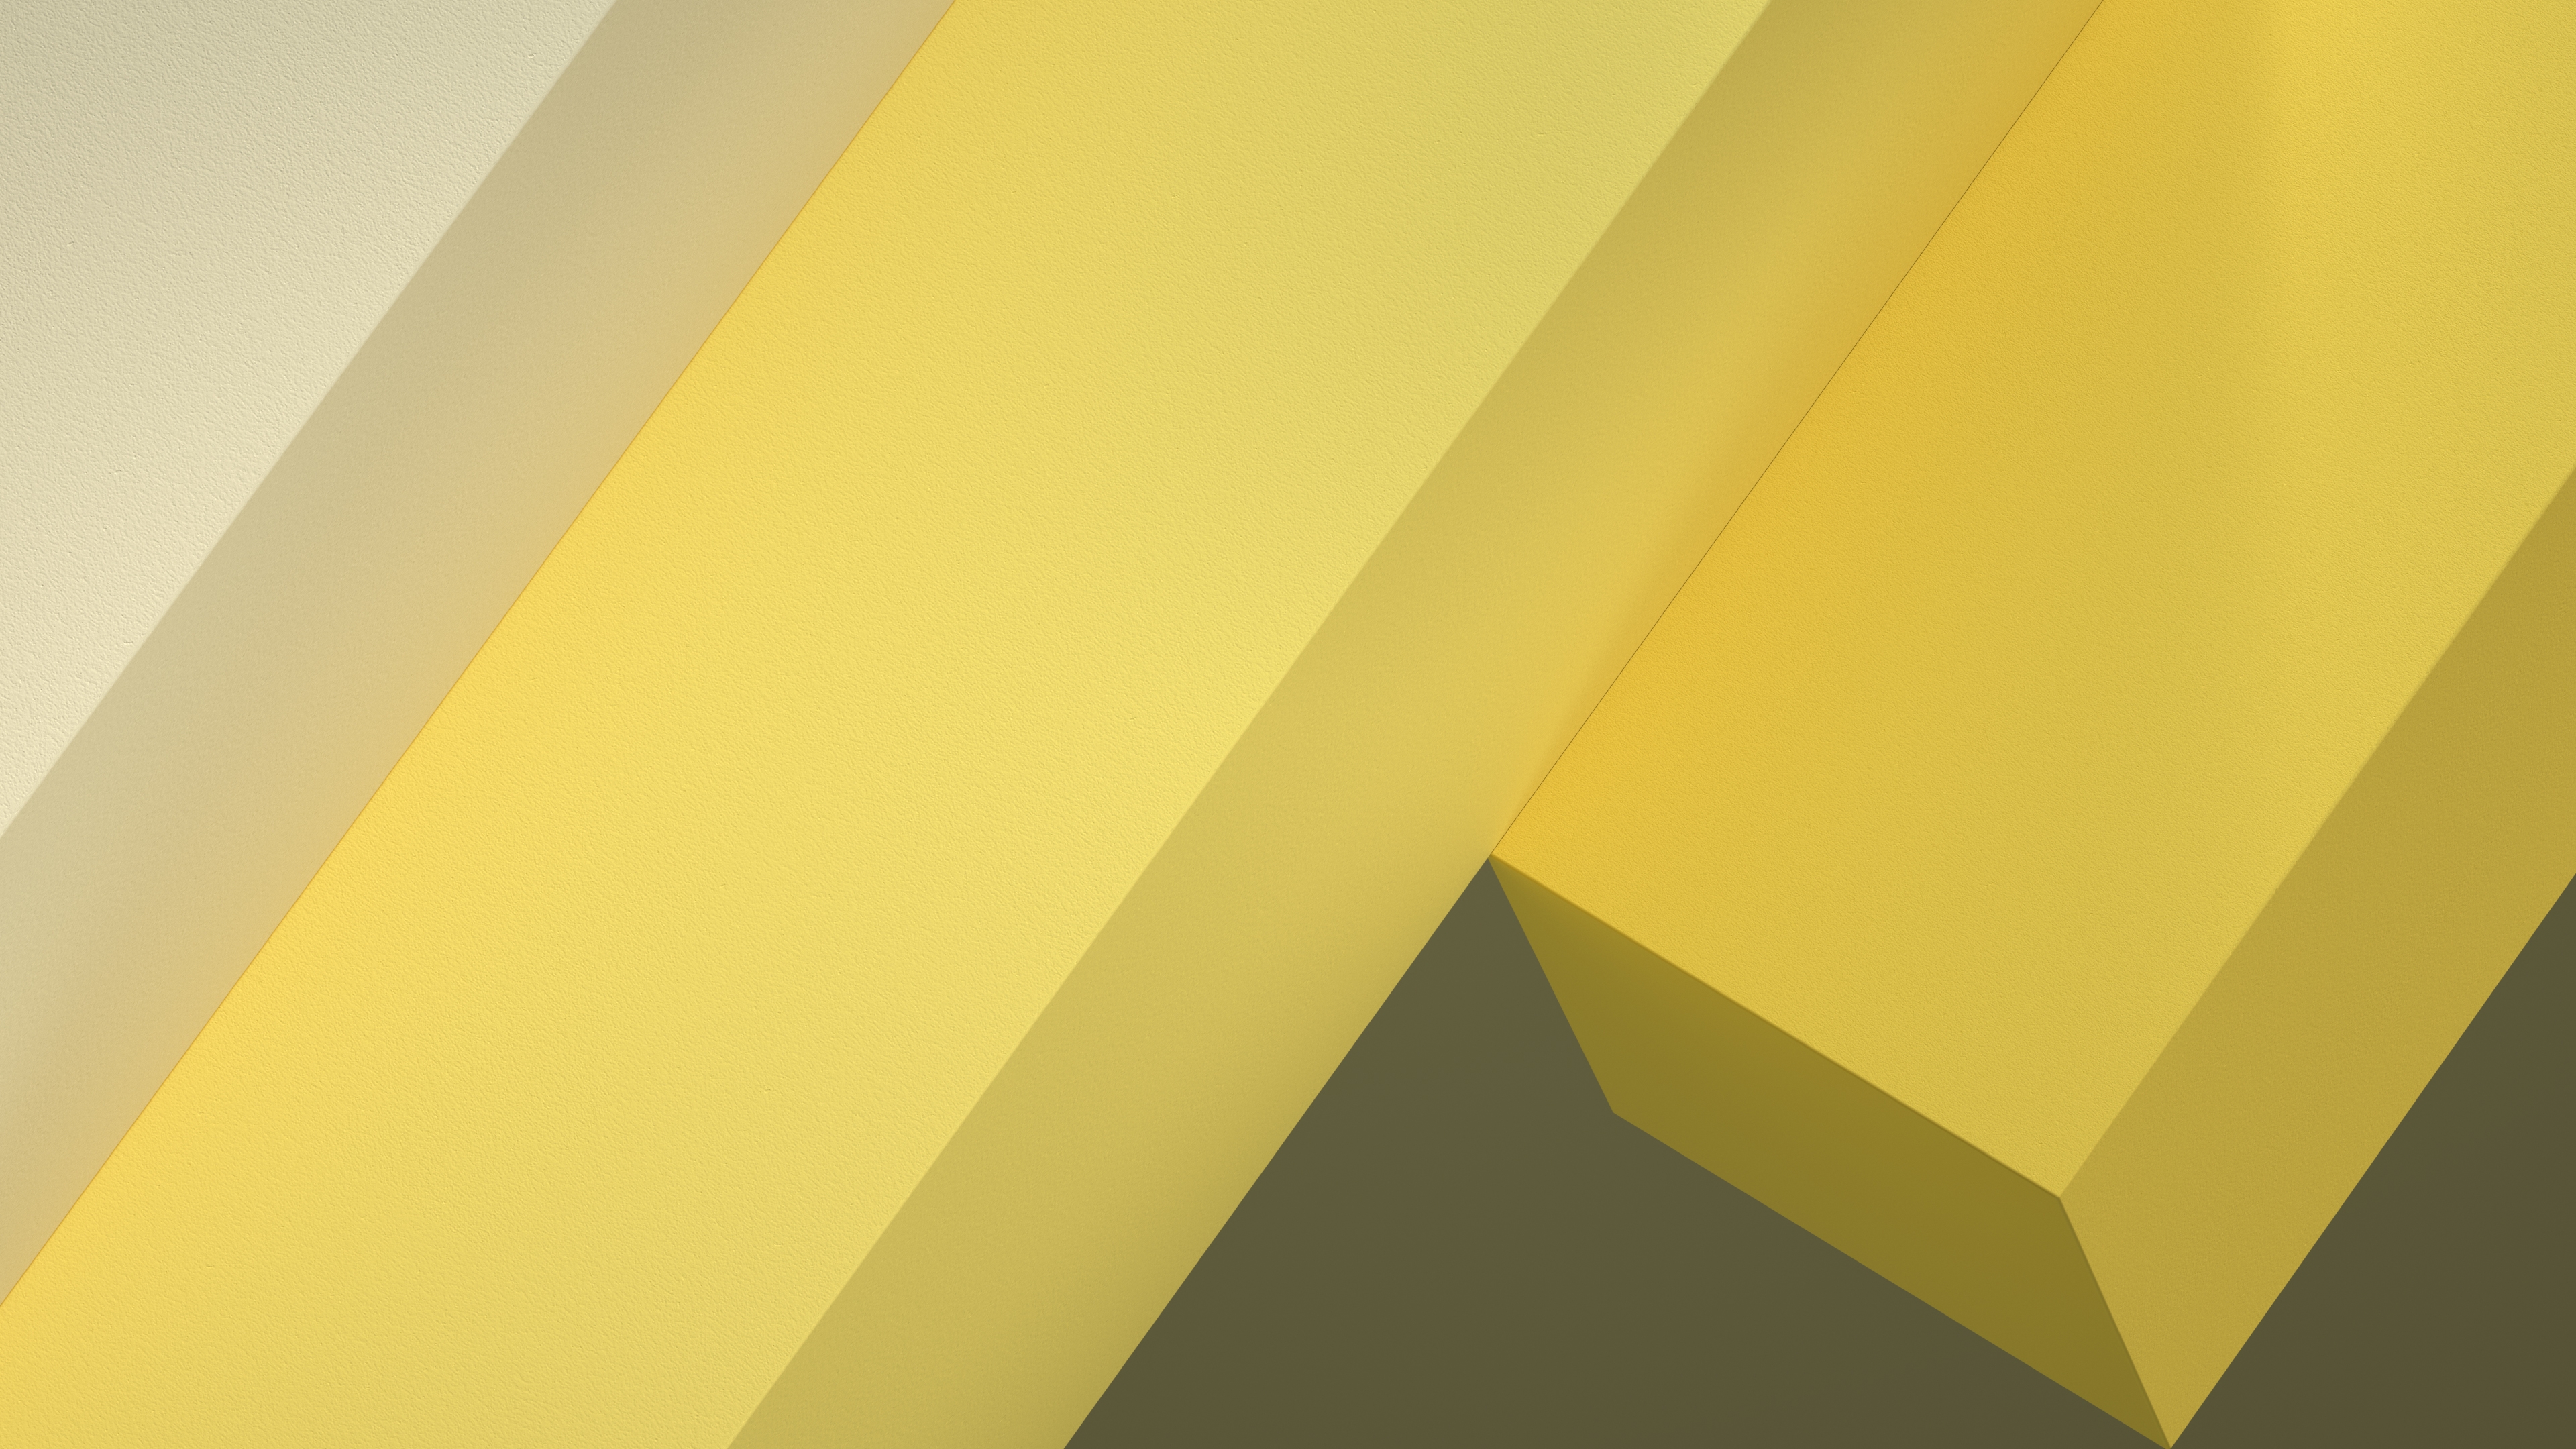 HD wallpaper, Illustration, 3D Shapes, Yellow Abstract, 3D, Geometric